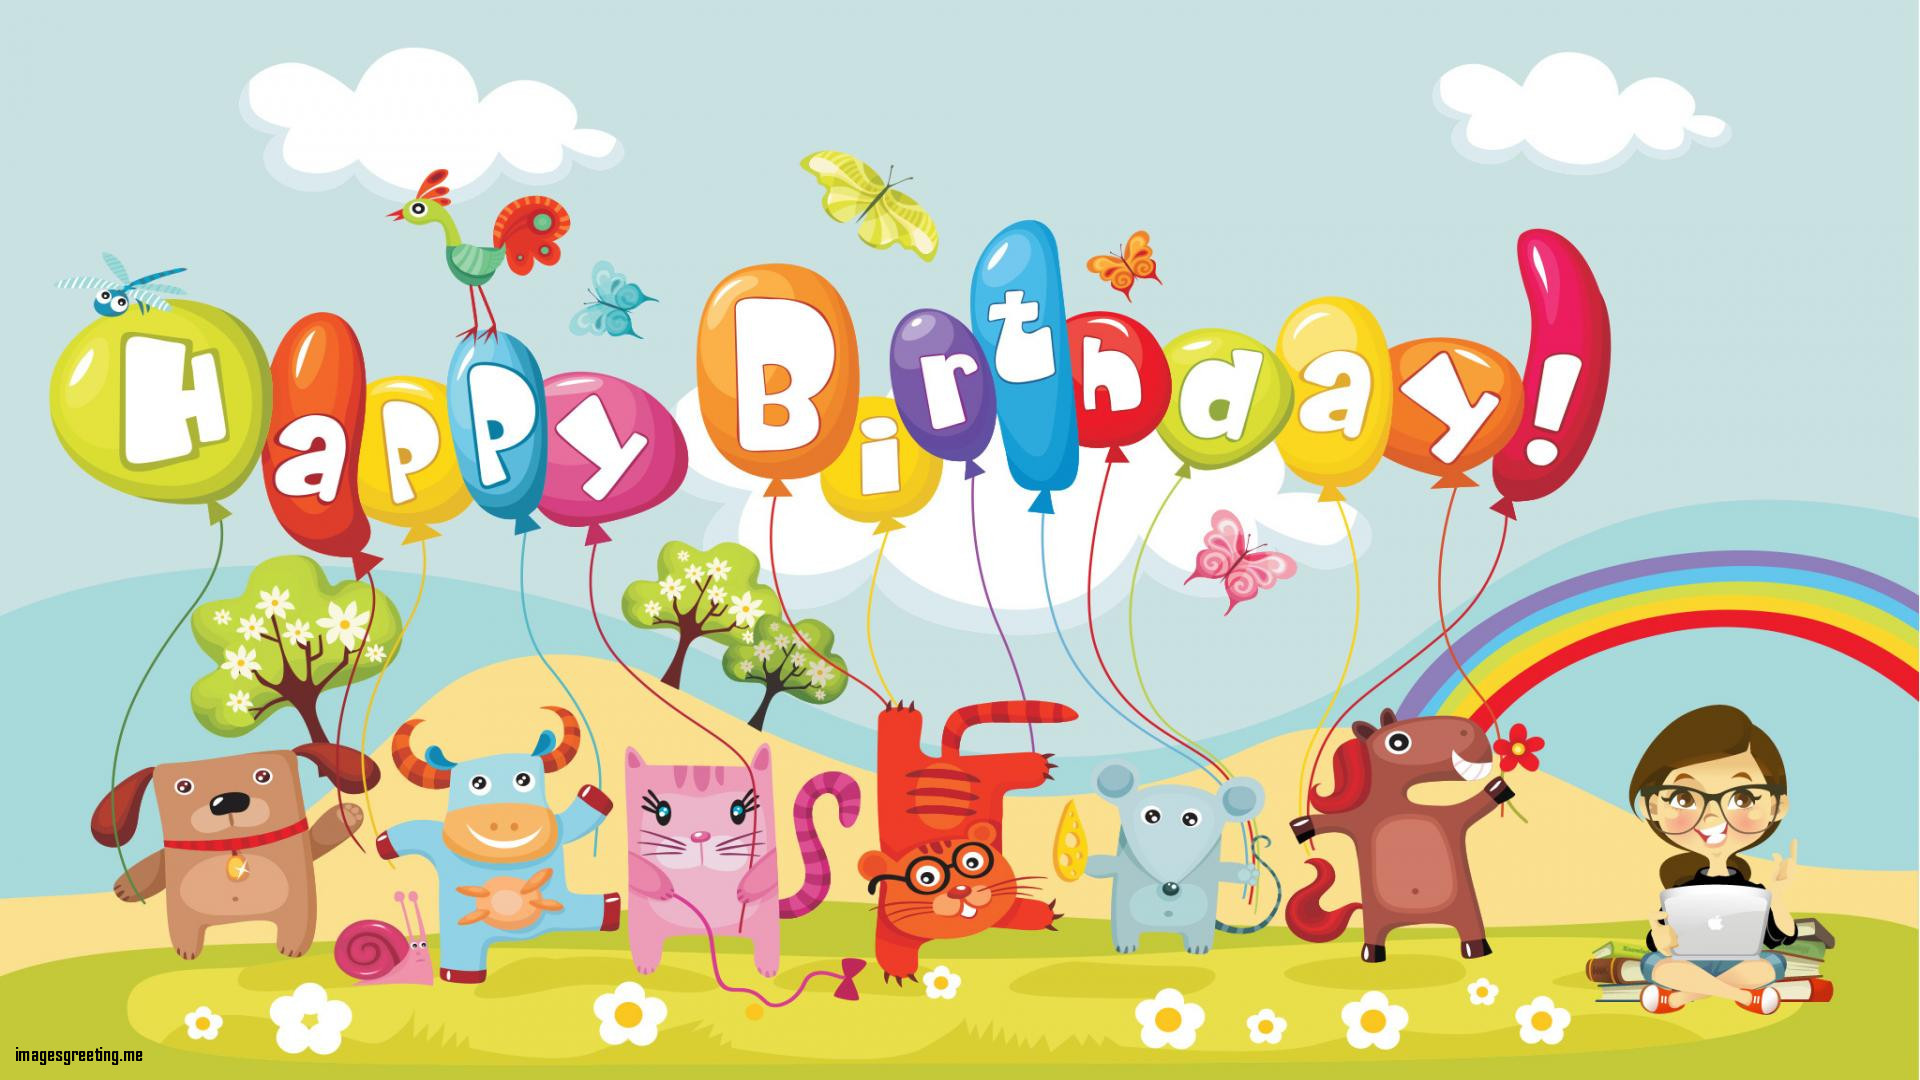 1920x1080 Best Of Happy Birthday Wallpaper Free for Desktop Backgrounds Throughout Funny  Happy Birthday Images Free